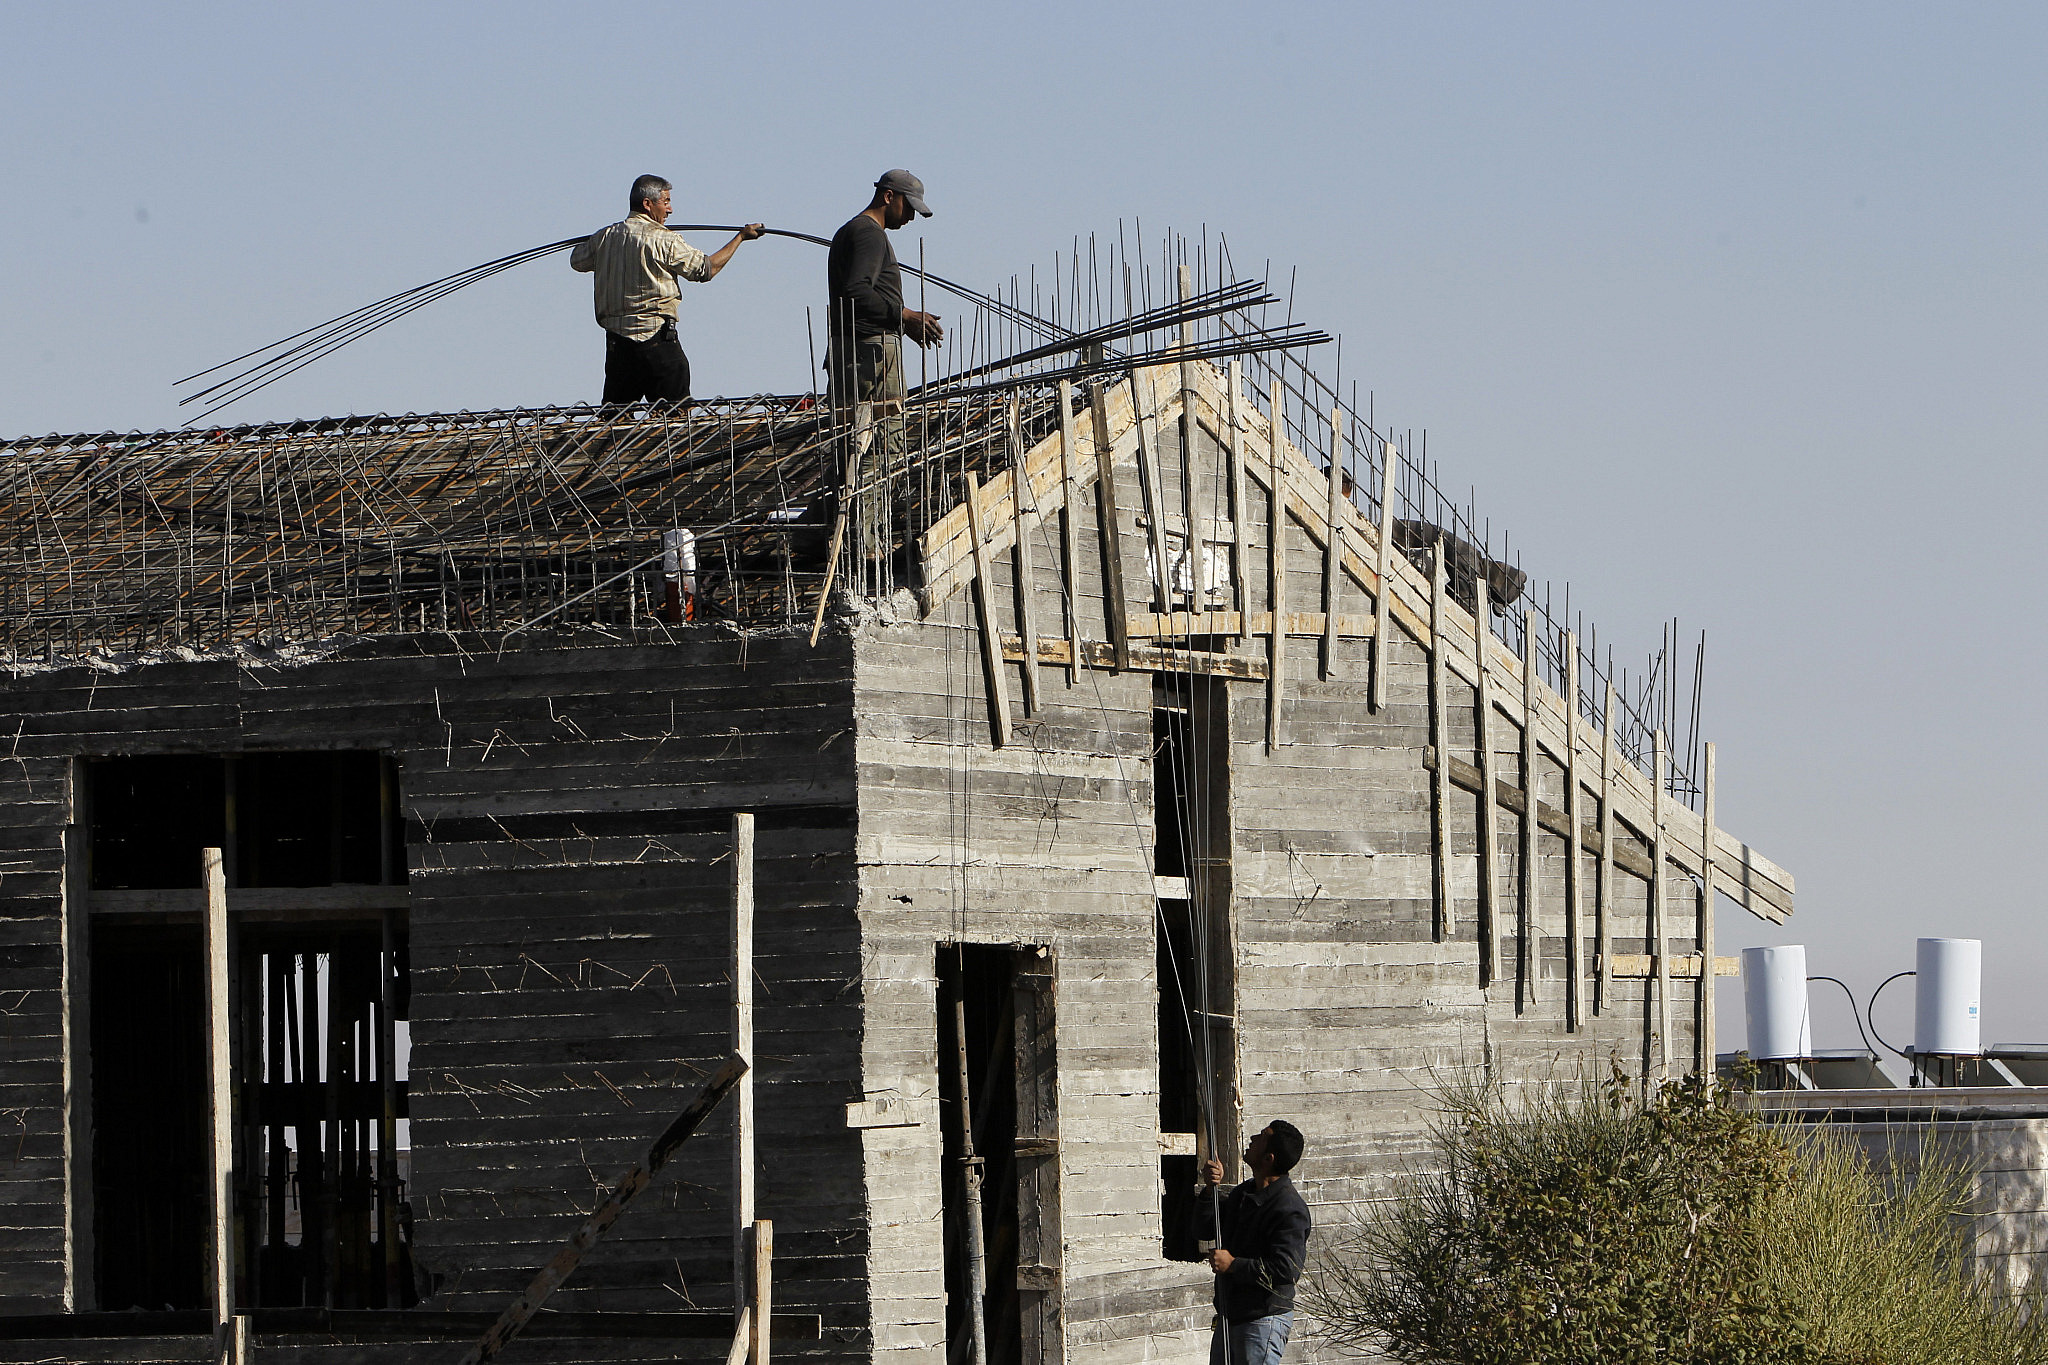 Palestinian workers in the settlement of Kfar Eldad, in the occupied West Bank, January 20, 2014. (Miriam Alster/FLASH90)